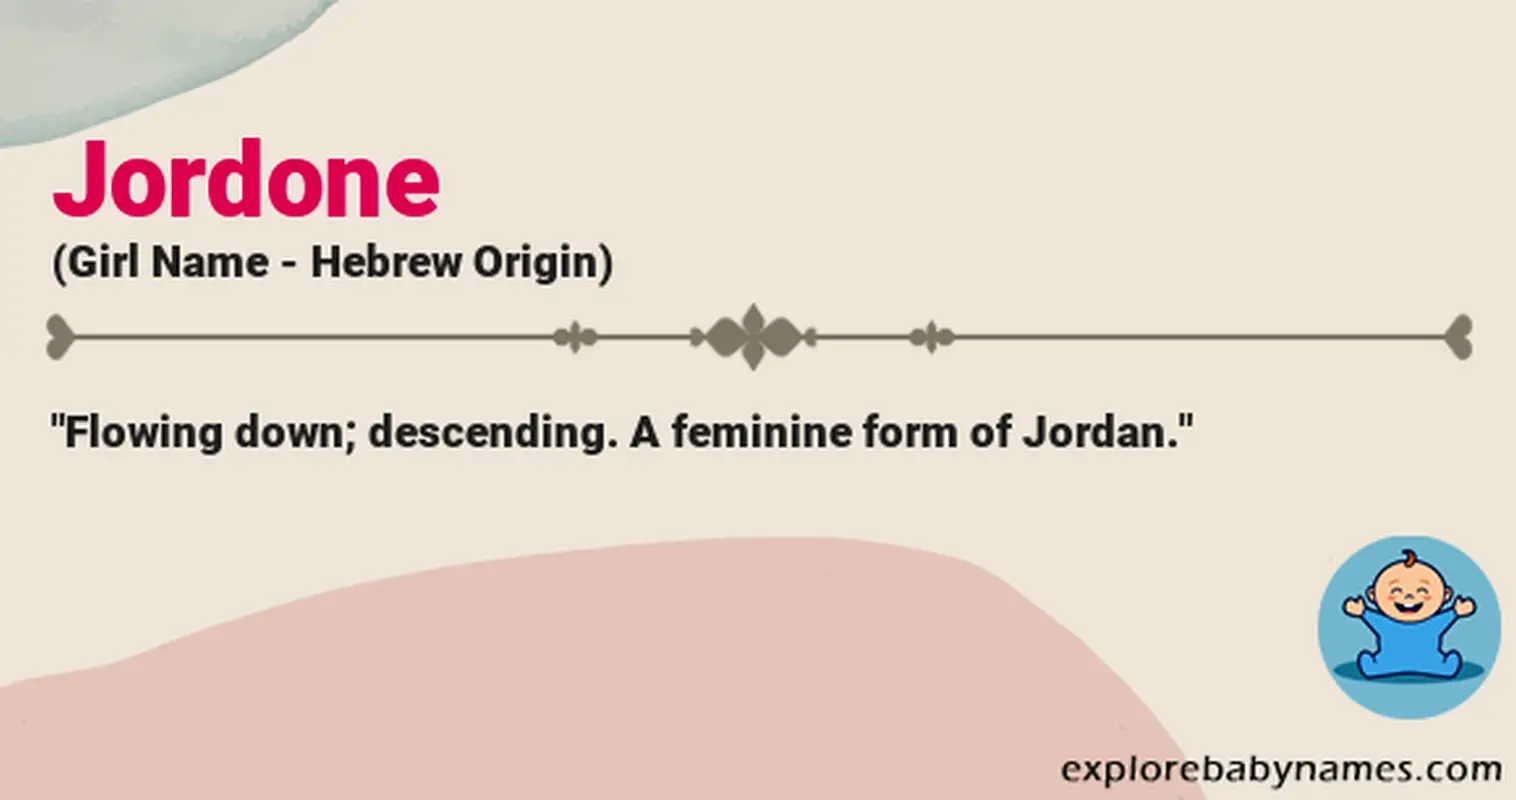 Meaning of Jordone